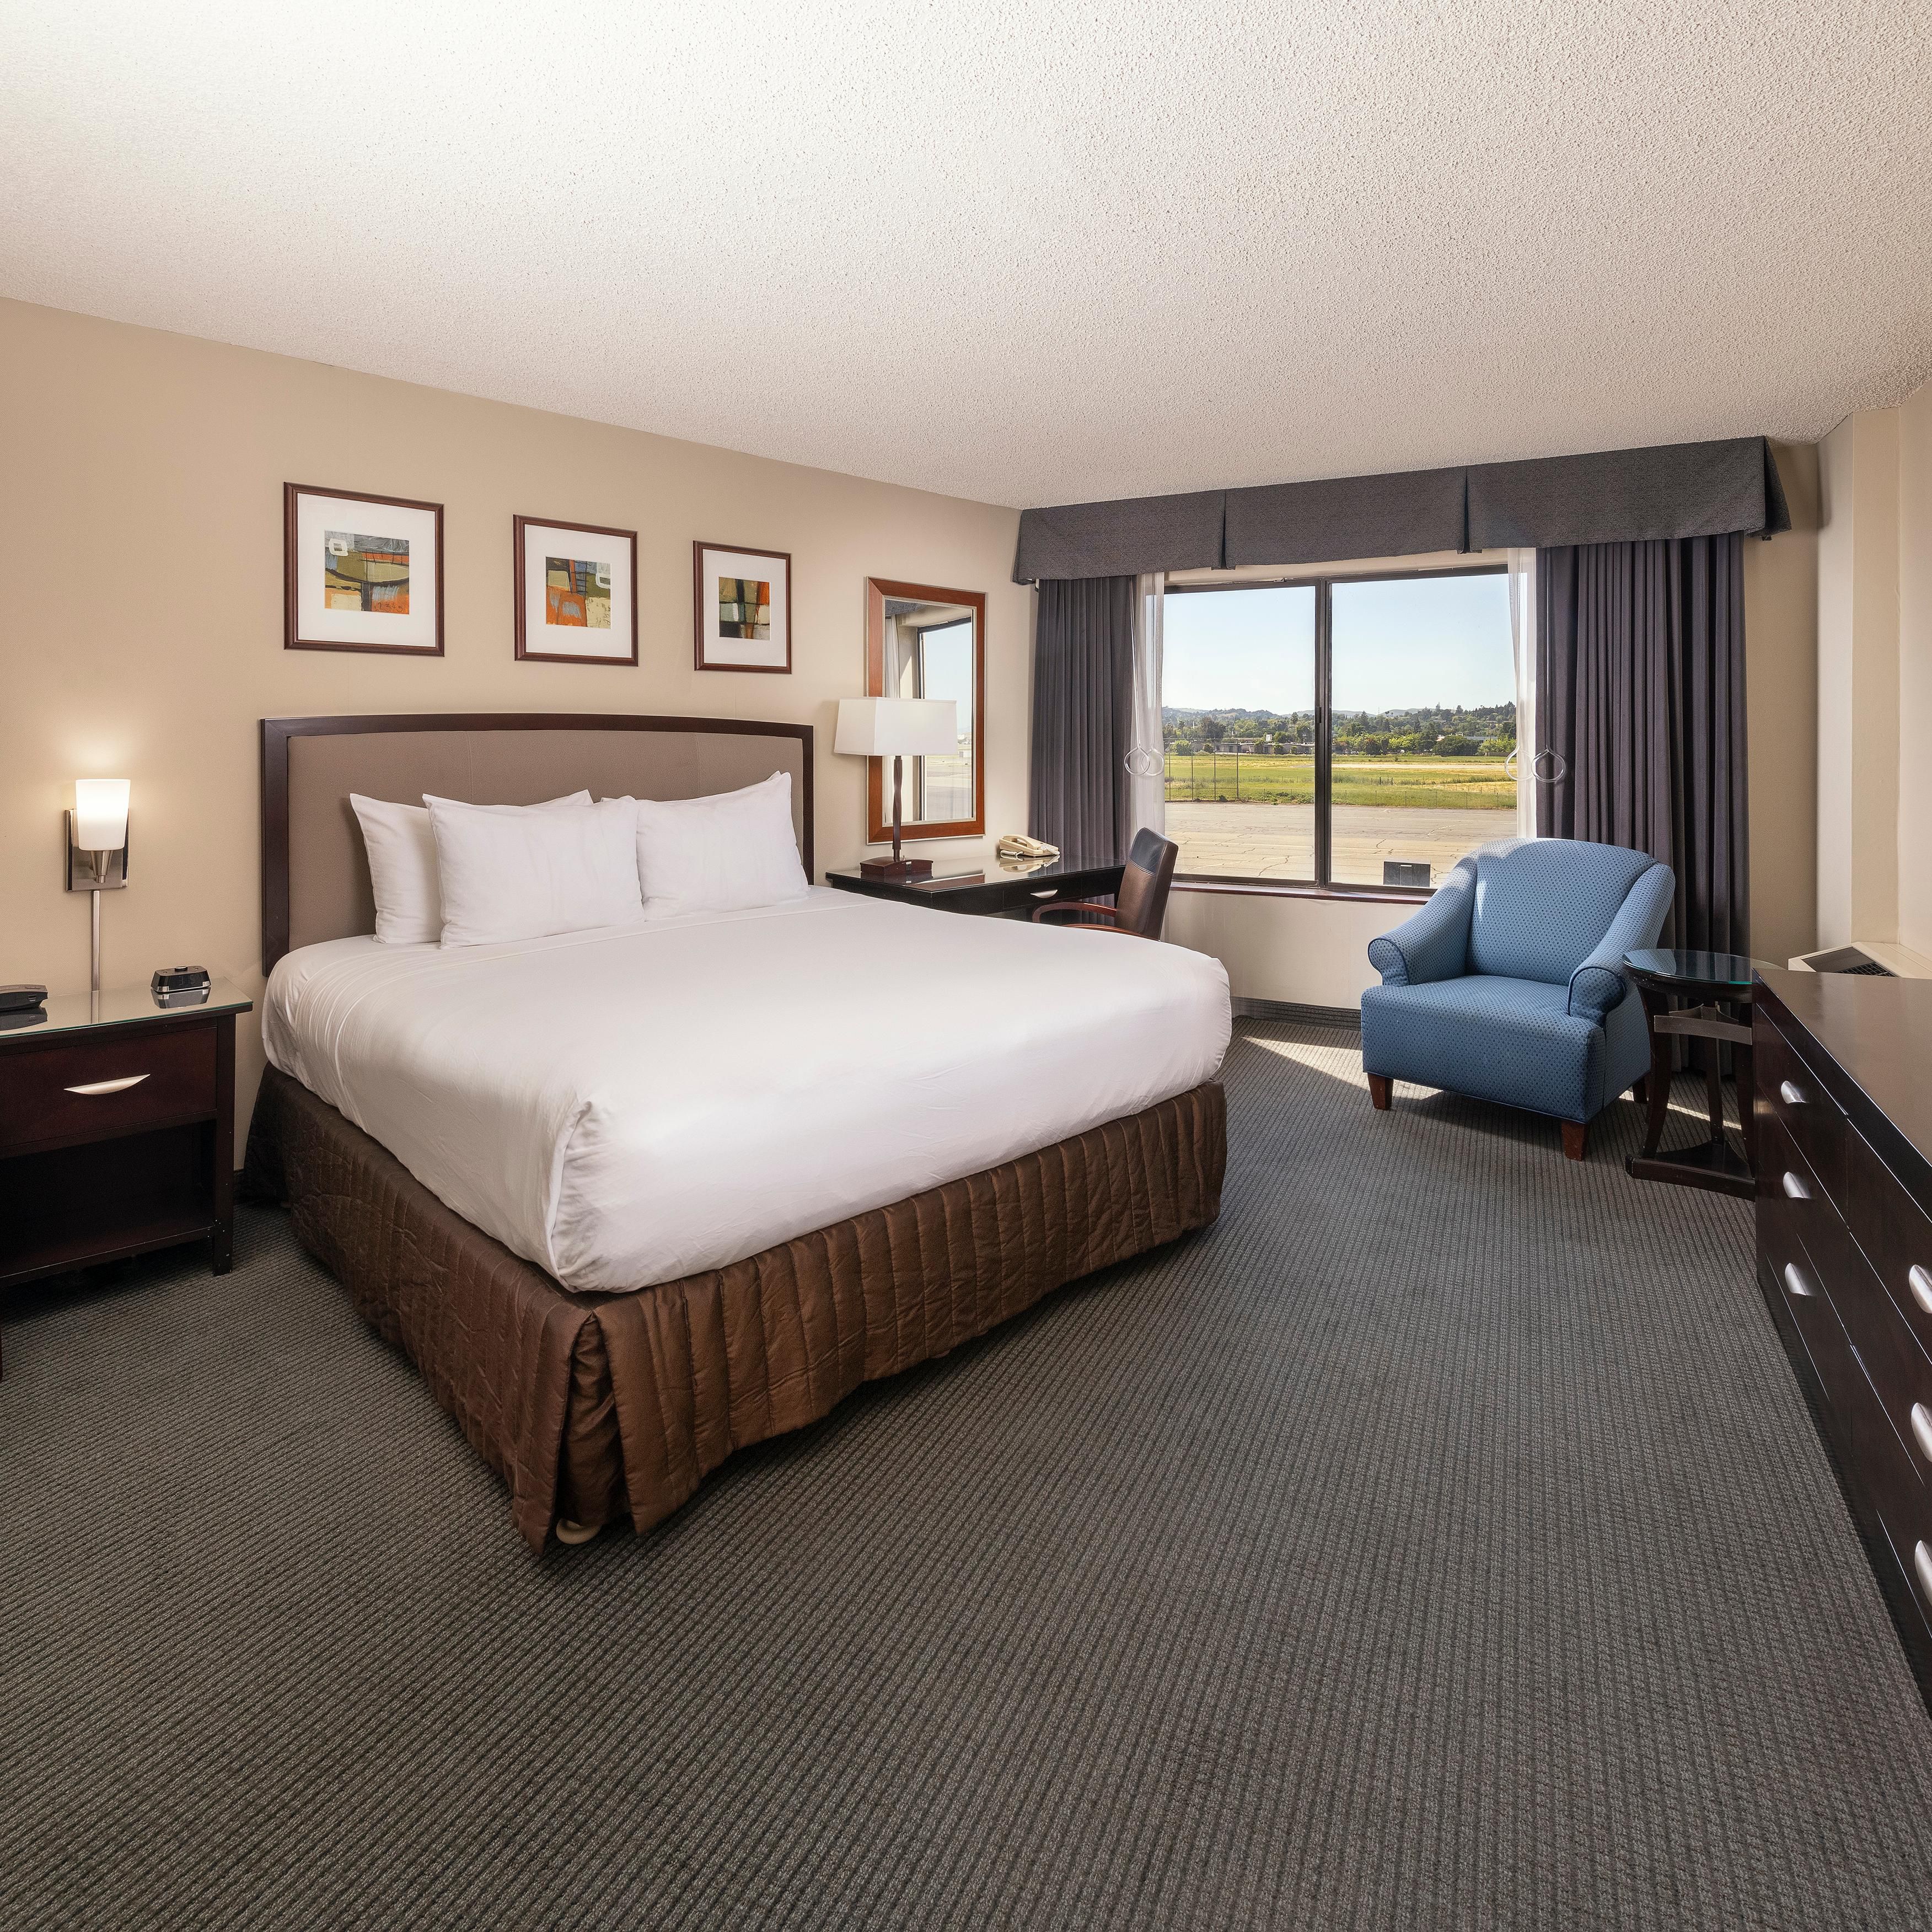 Make yourself at home in our king guest rooms.